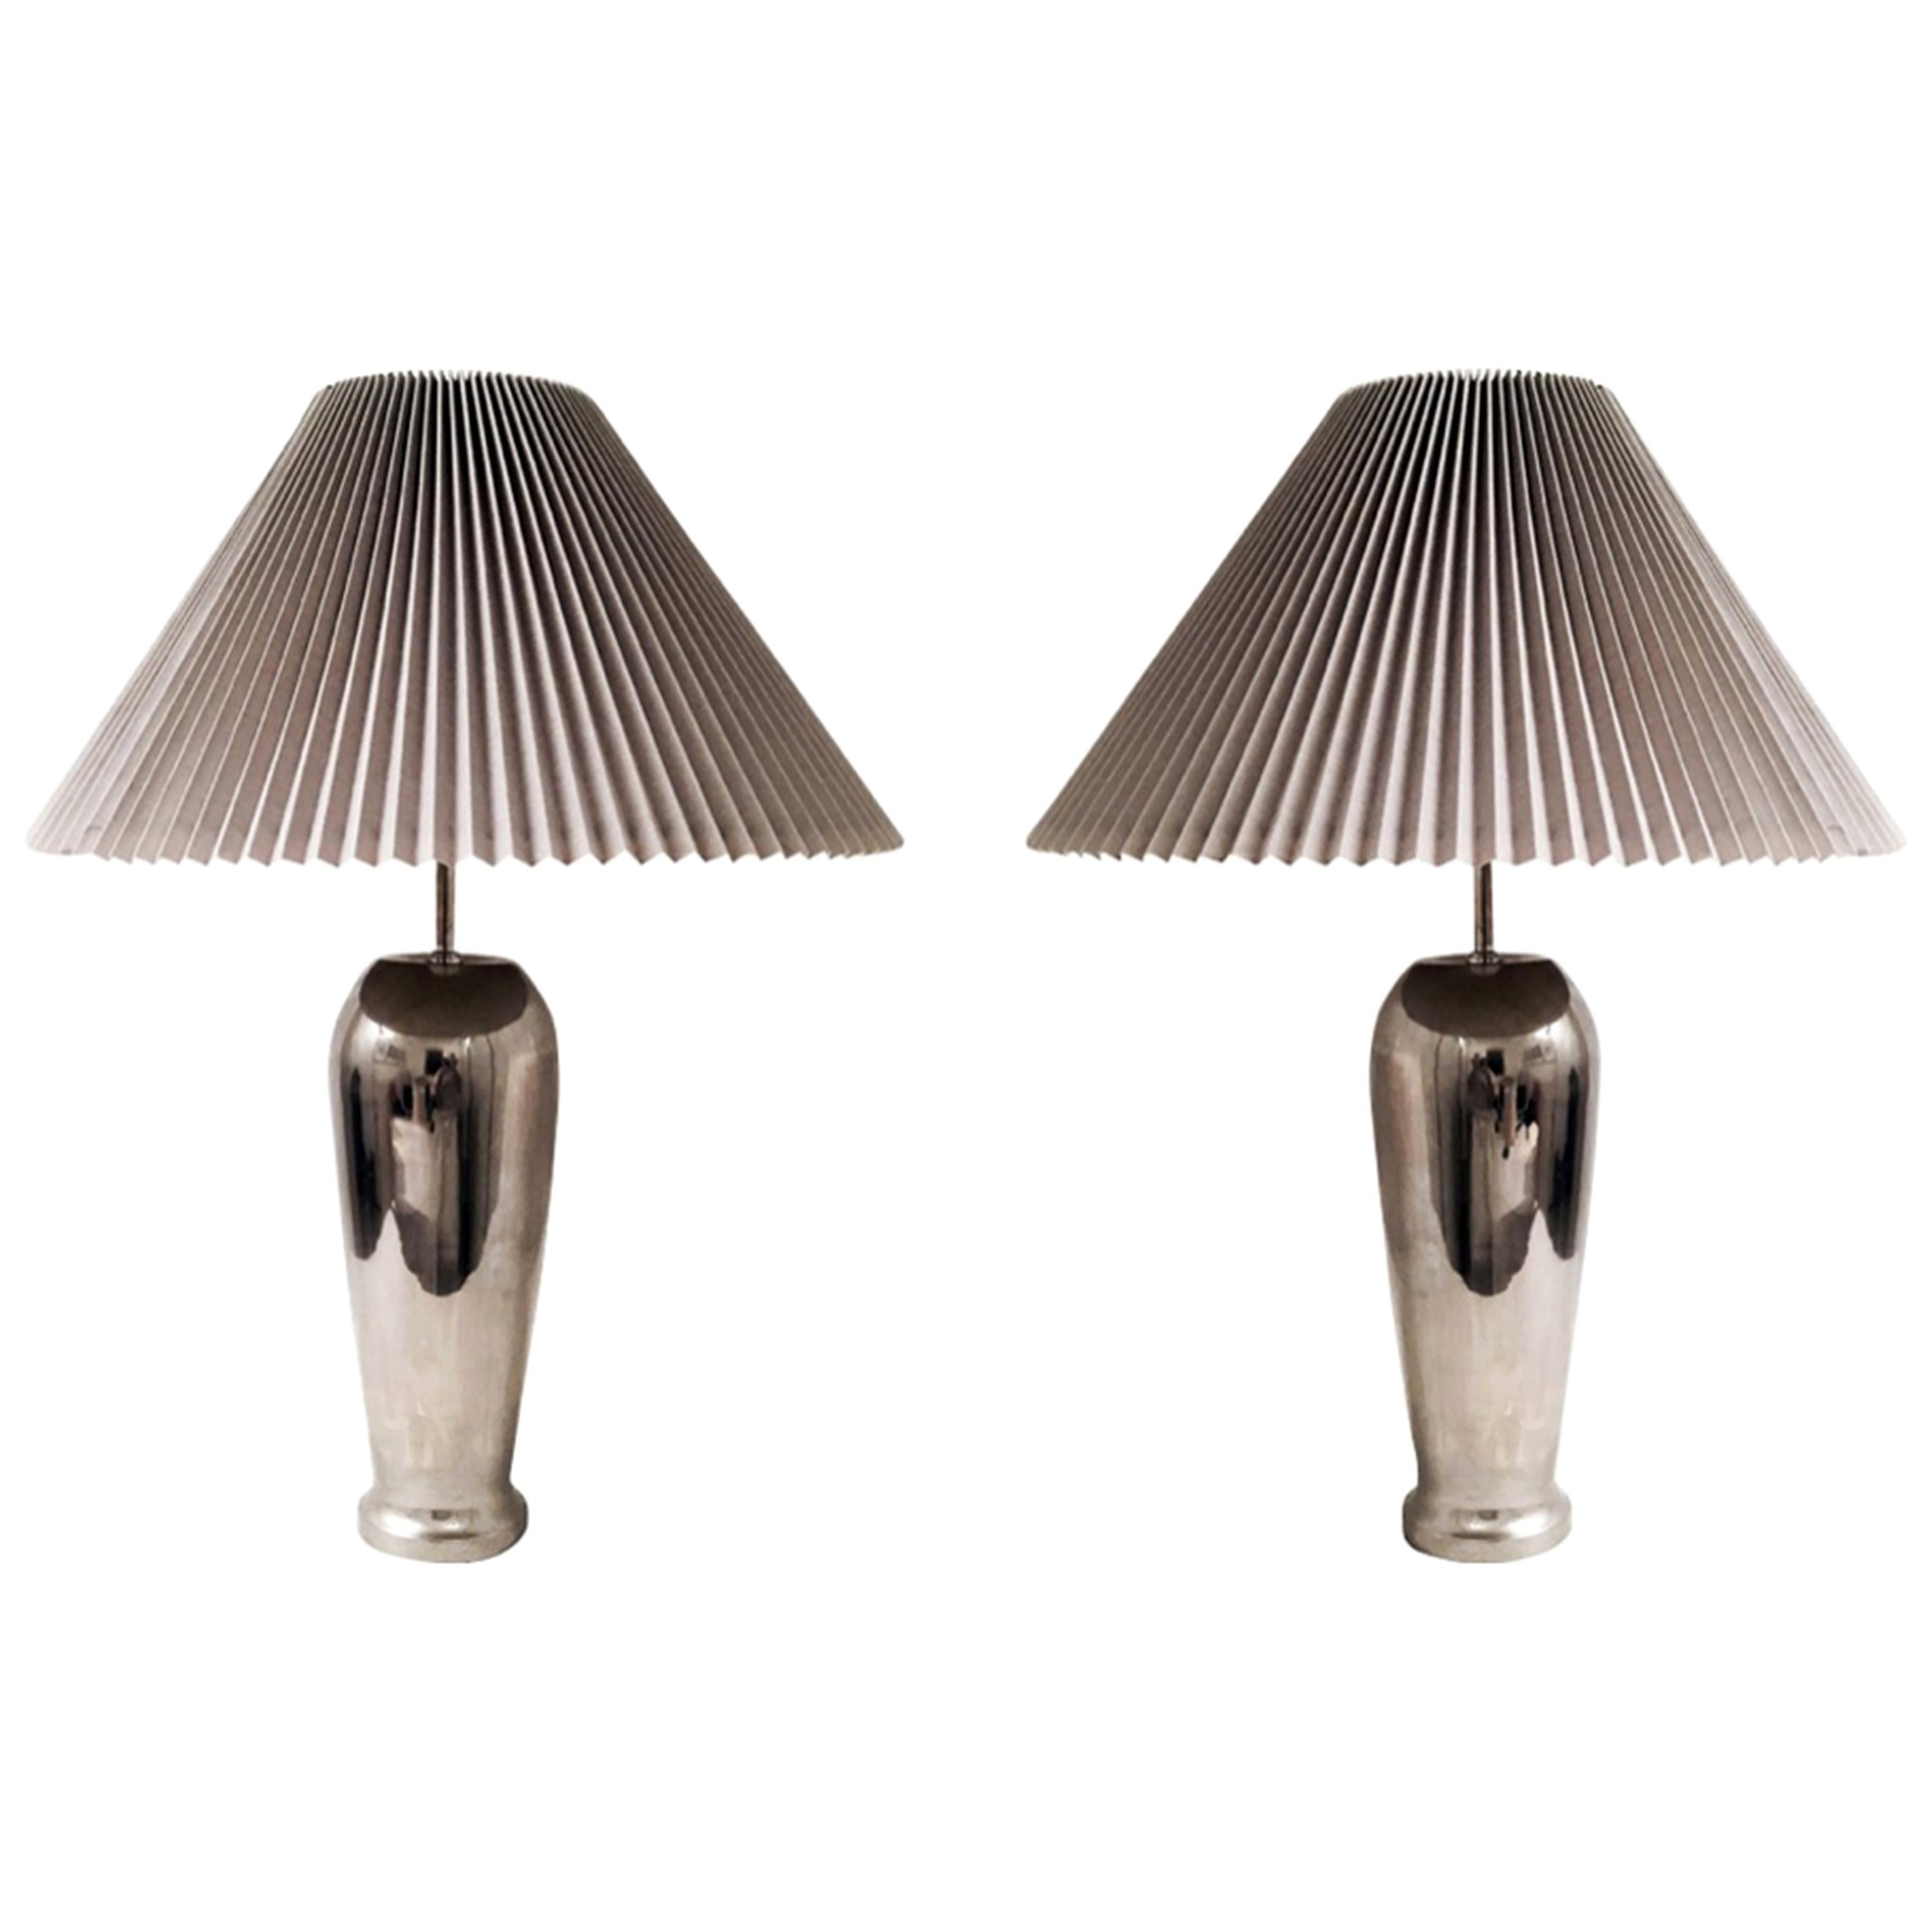 1980s Chrome Table Lamps with Knife Pleat Hardback Shades For Sale